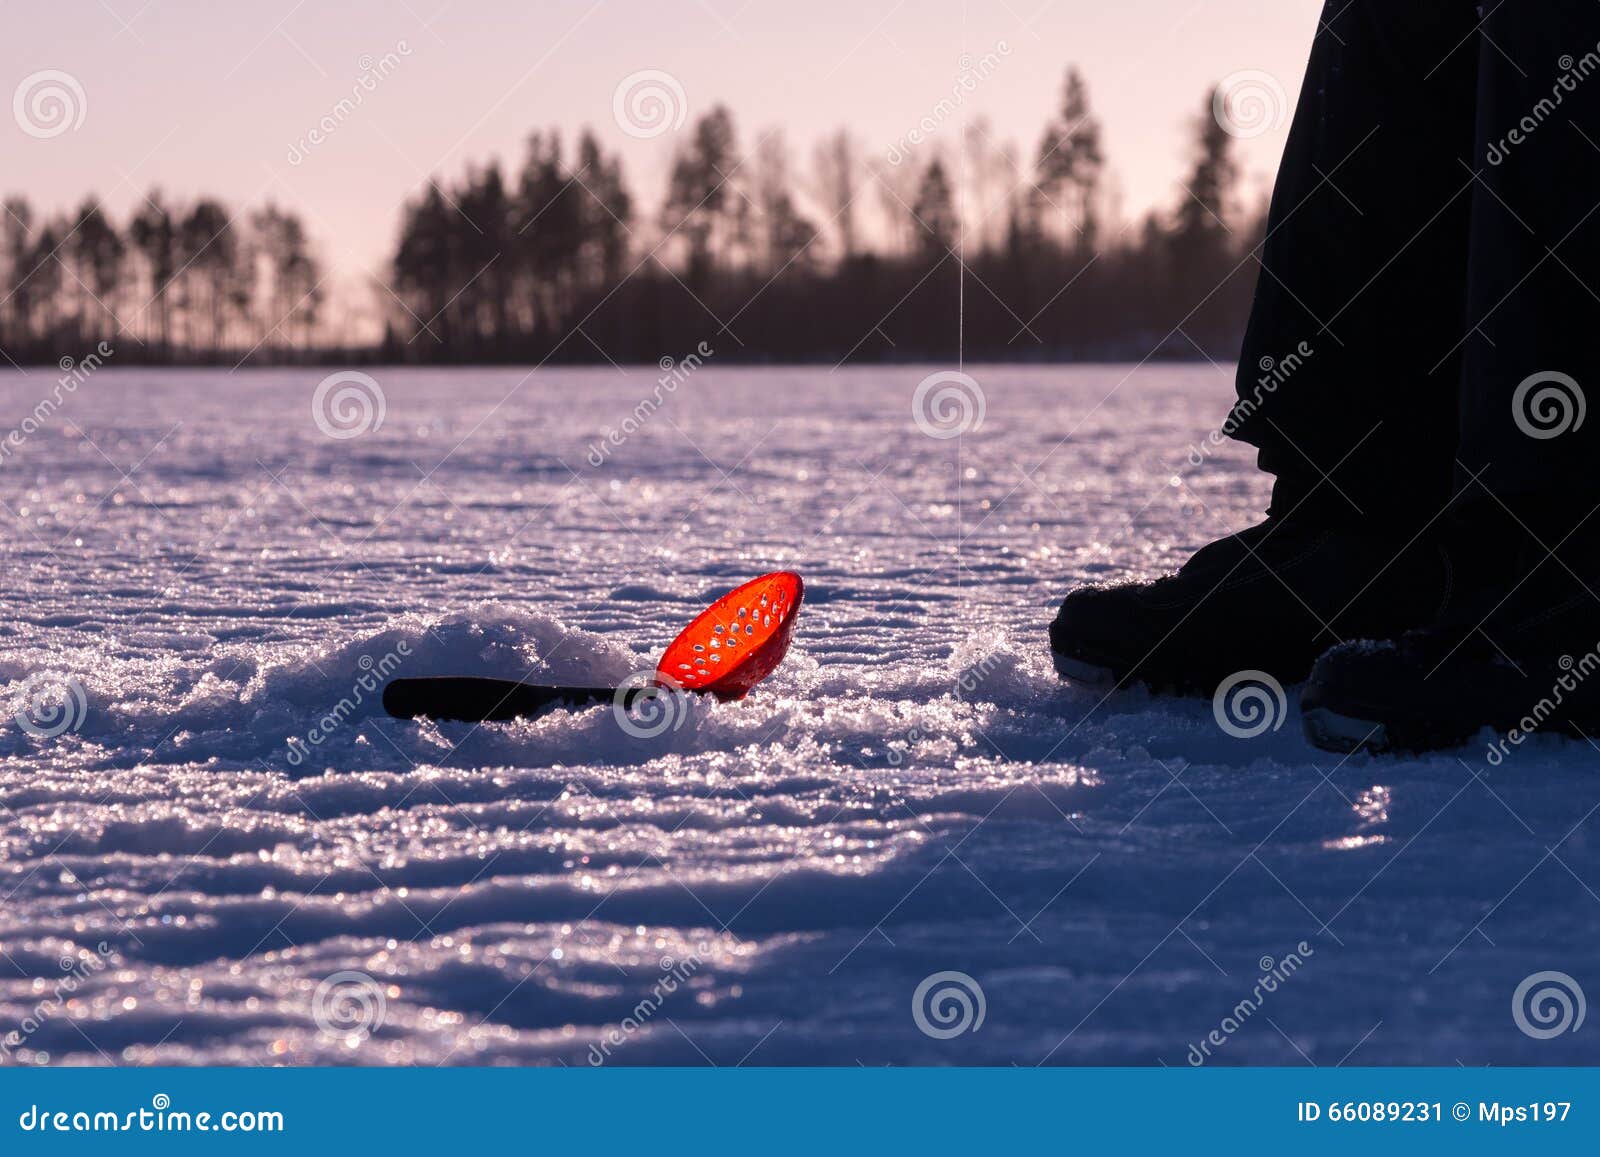 Plastic Skimmer Scoop Laying on Ice while Ice Fishing Stock Image